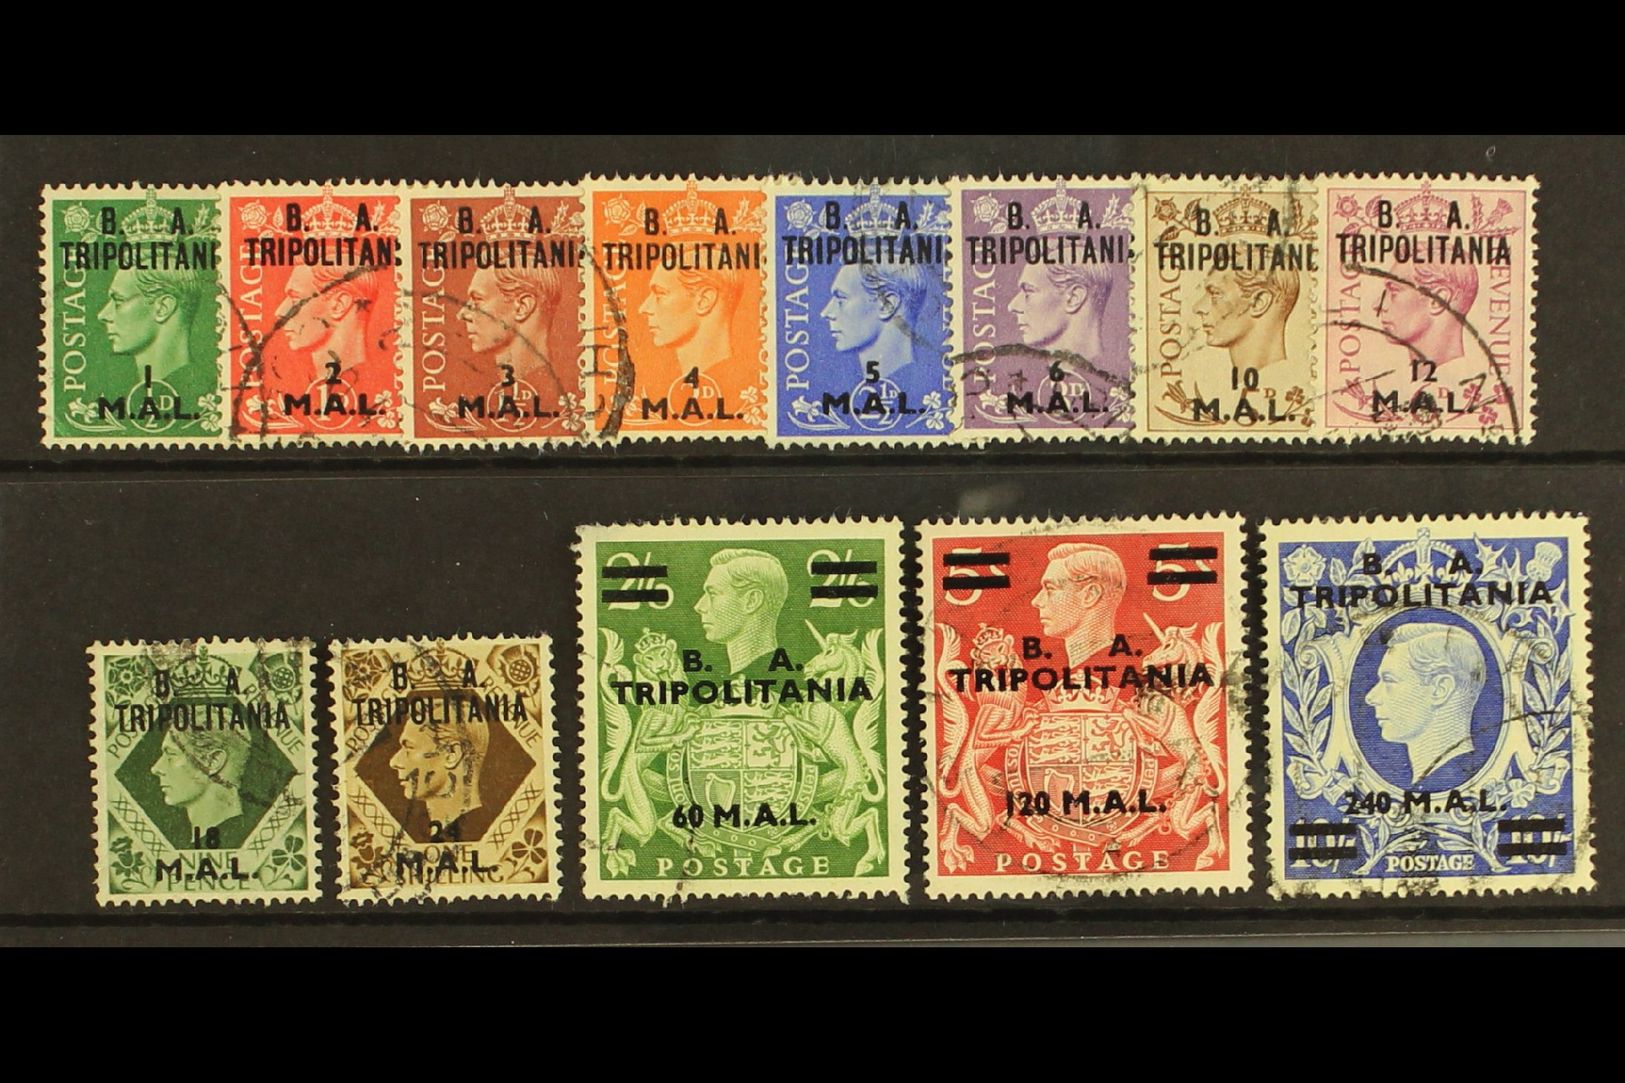 5616 TRIPOLITANIA 1950 KGVI GB "B. A. TRIPOLITANIA" Overprints, SG T14/26, 2s6d Slightly Thinned Corner (barely Detracts - Italian Eastern Africa